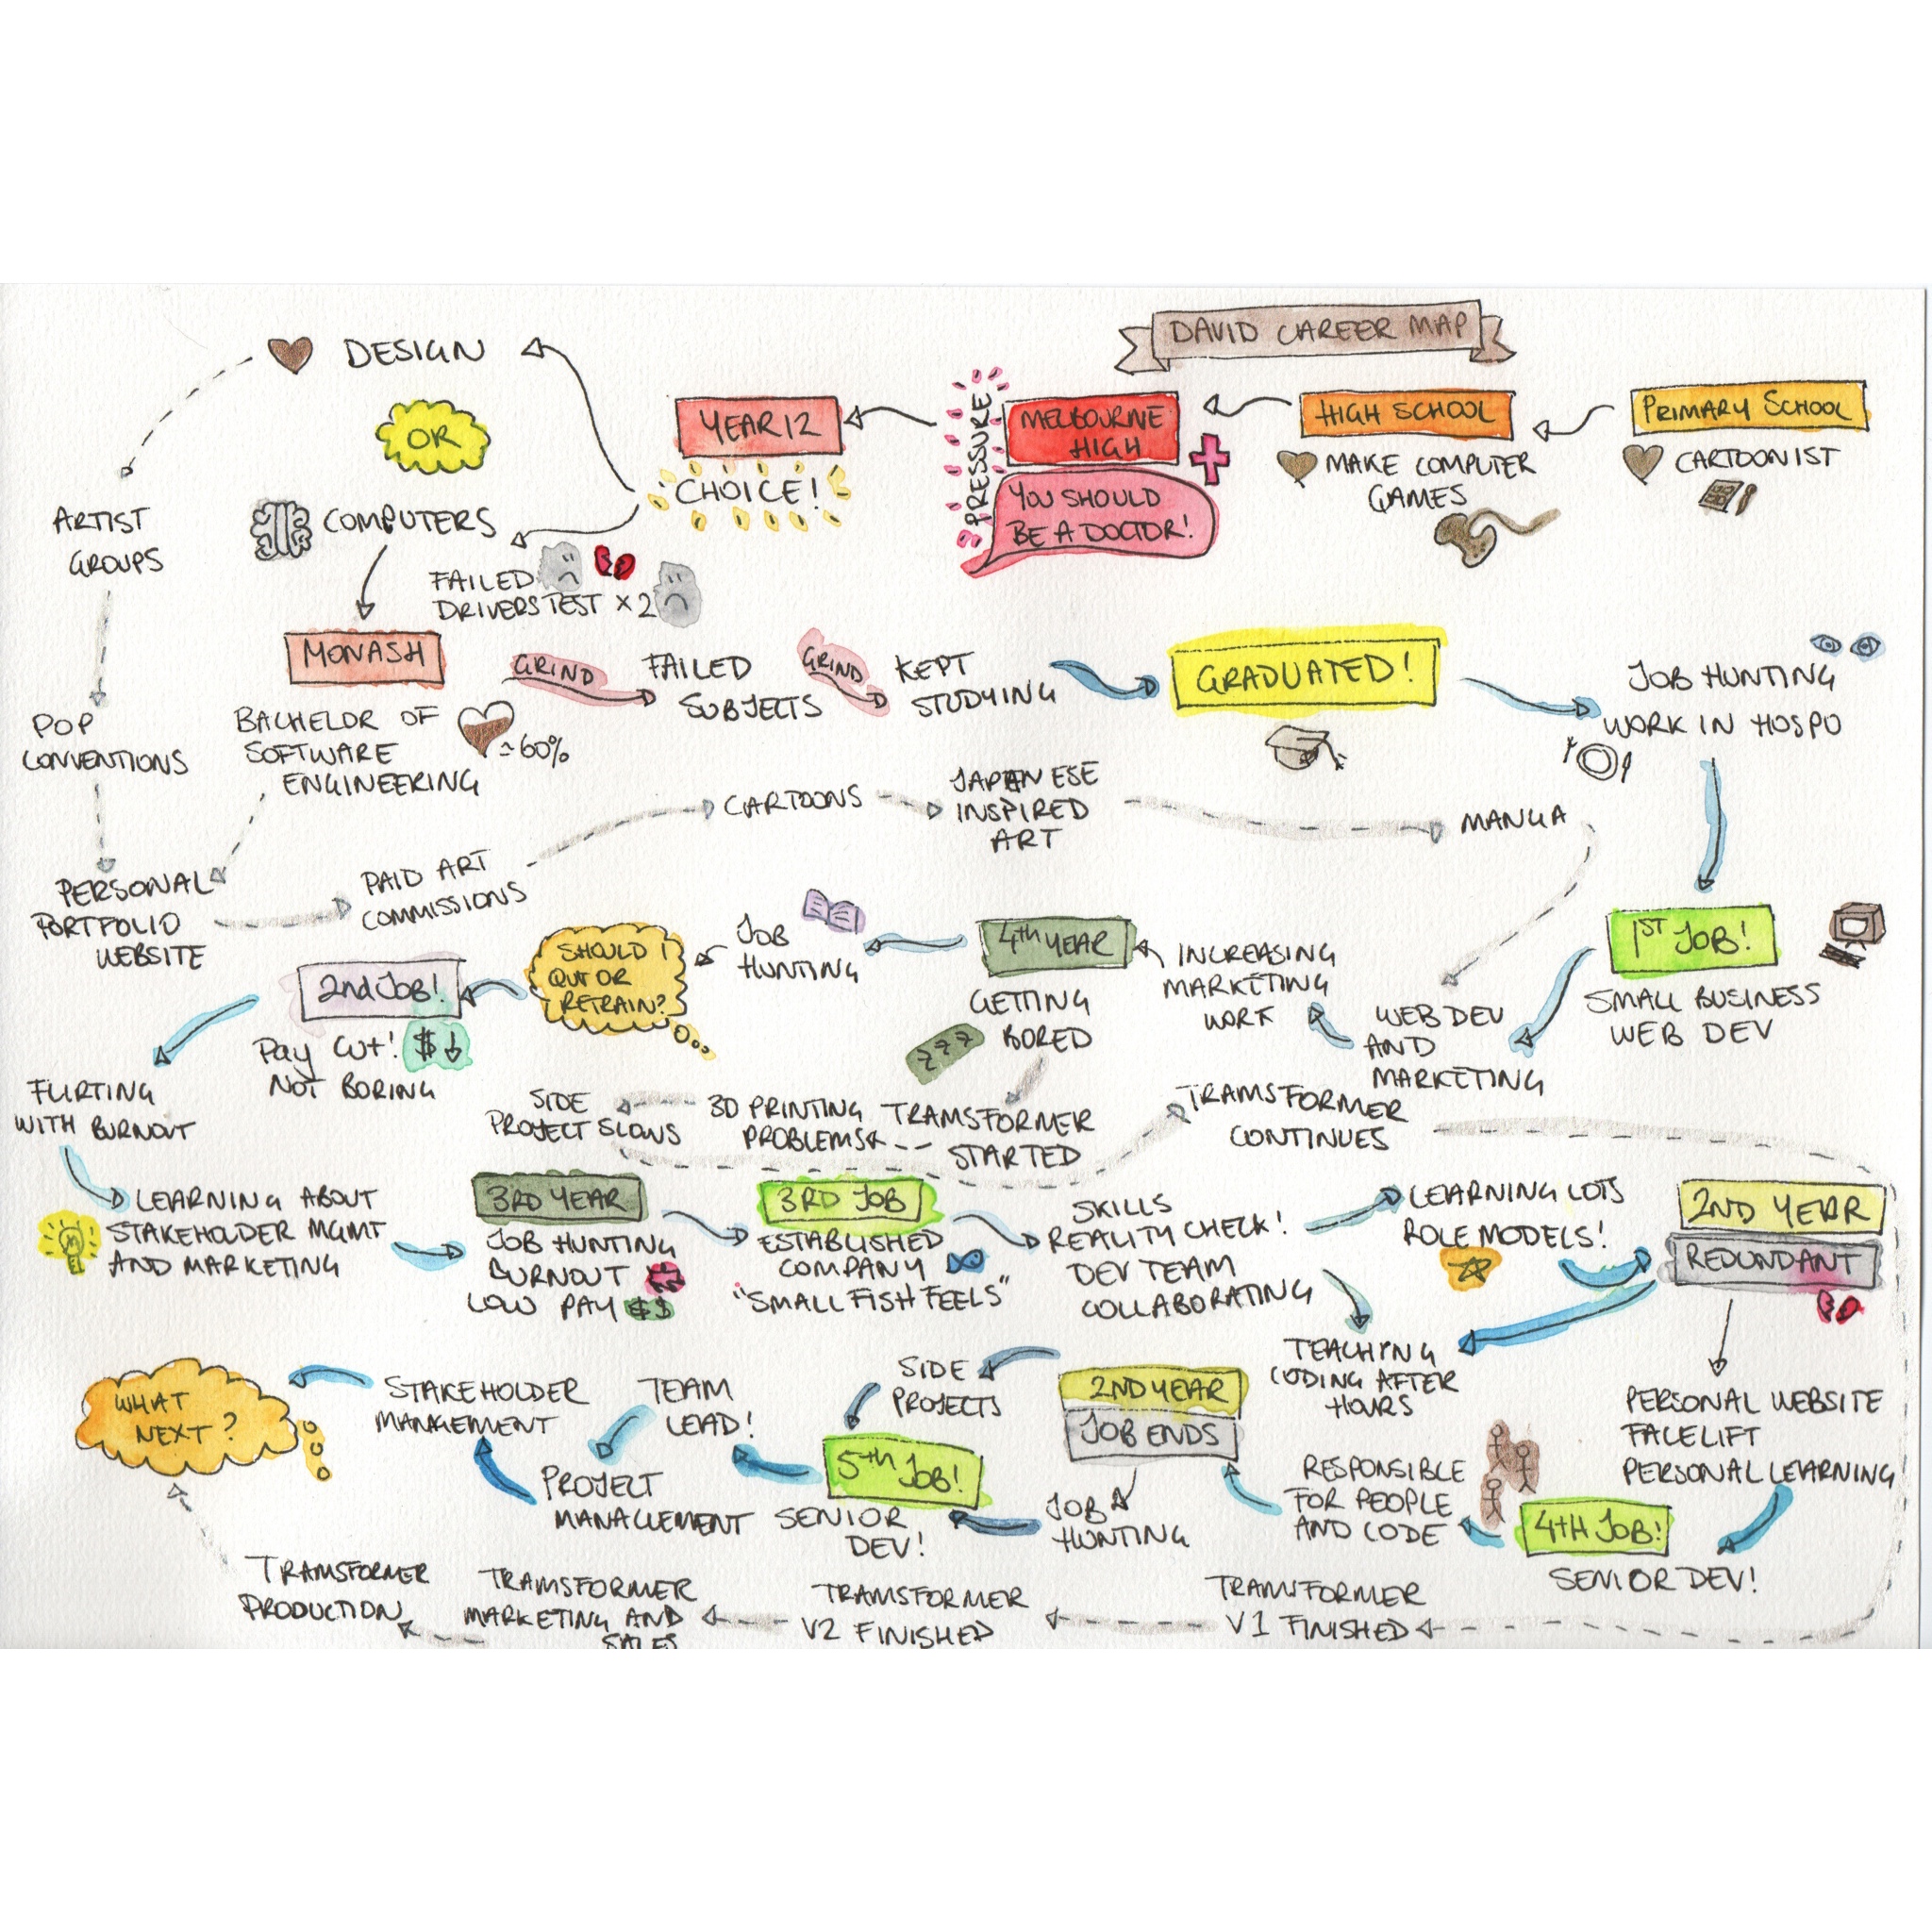 image is a career map of a web developer